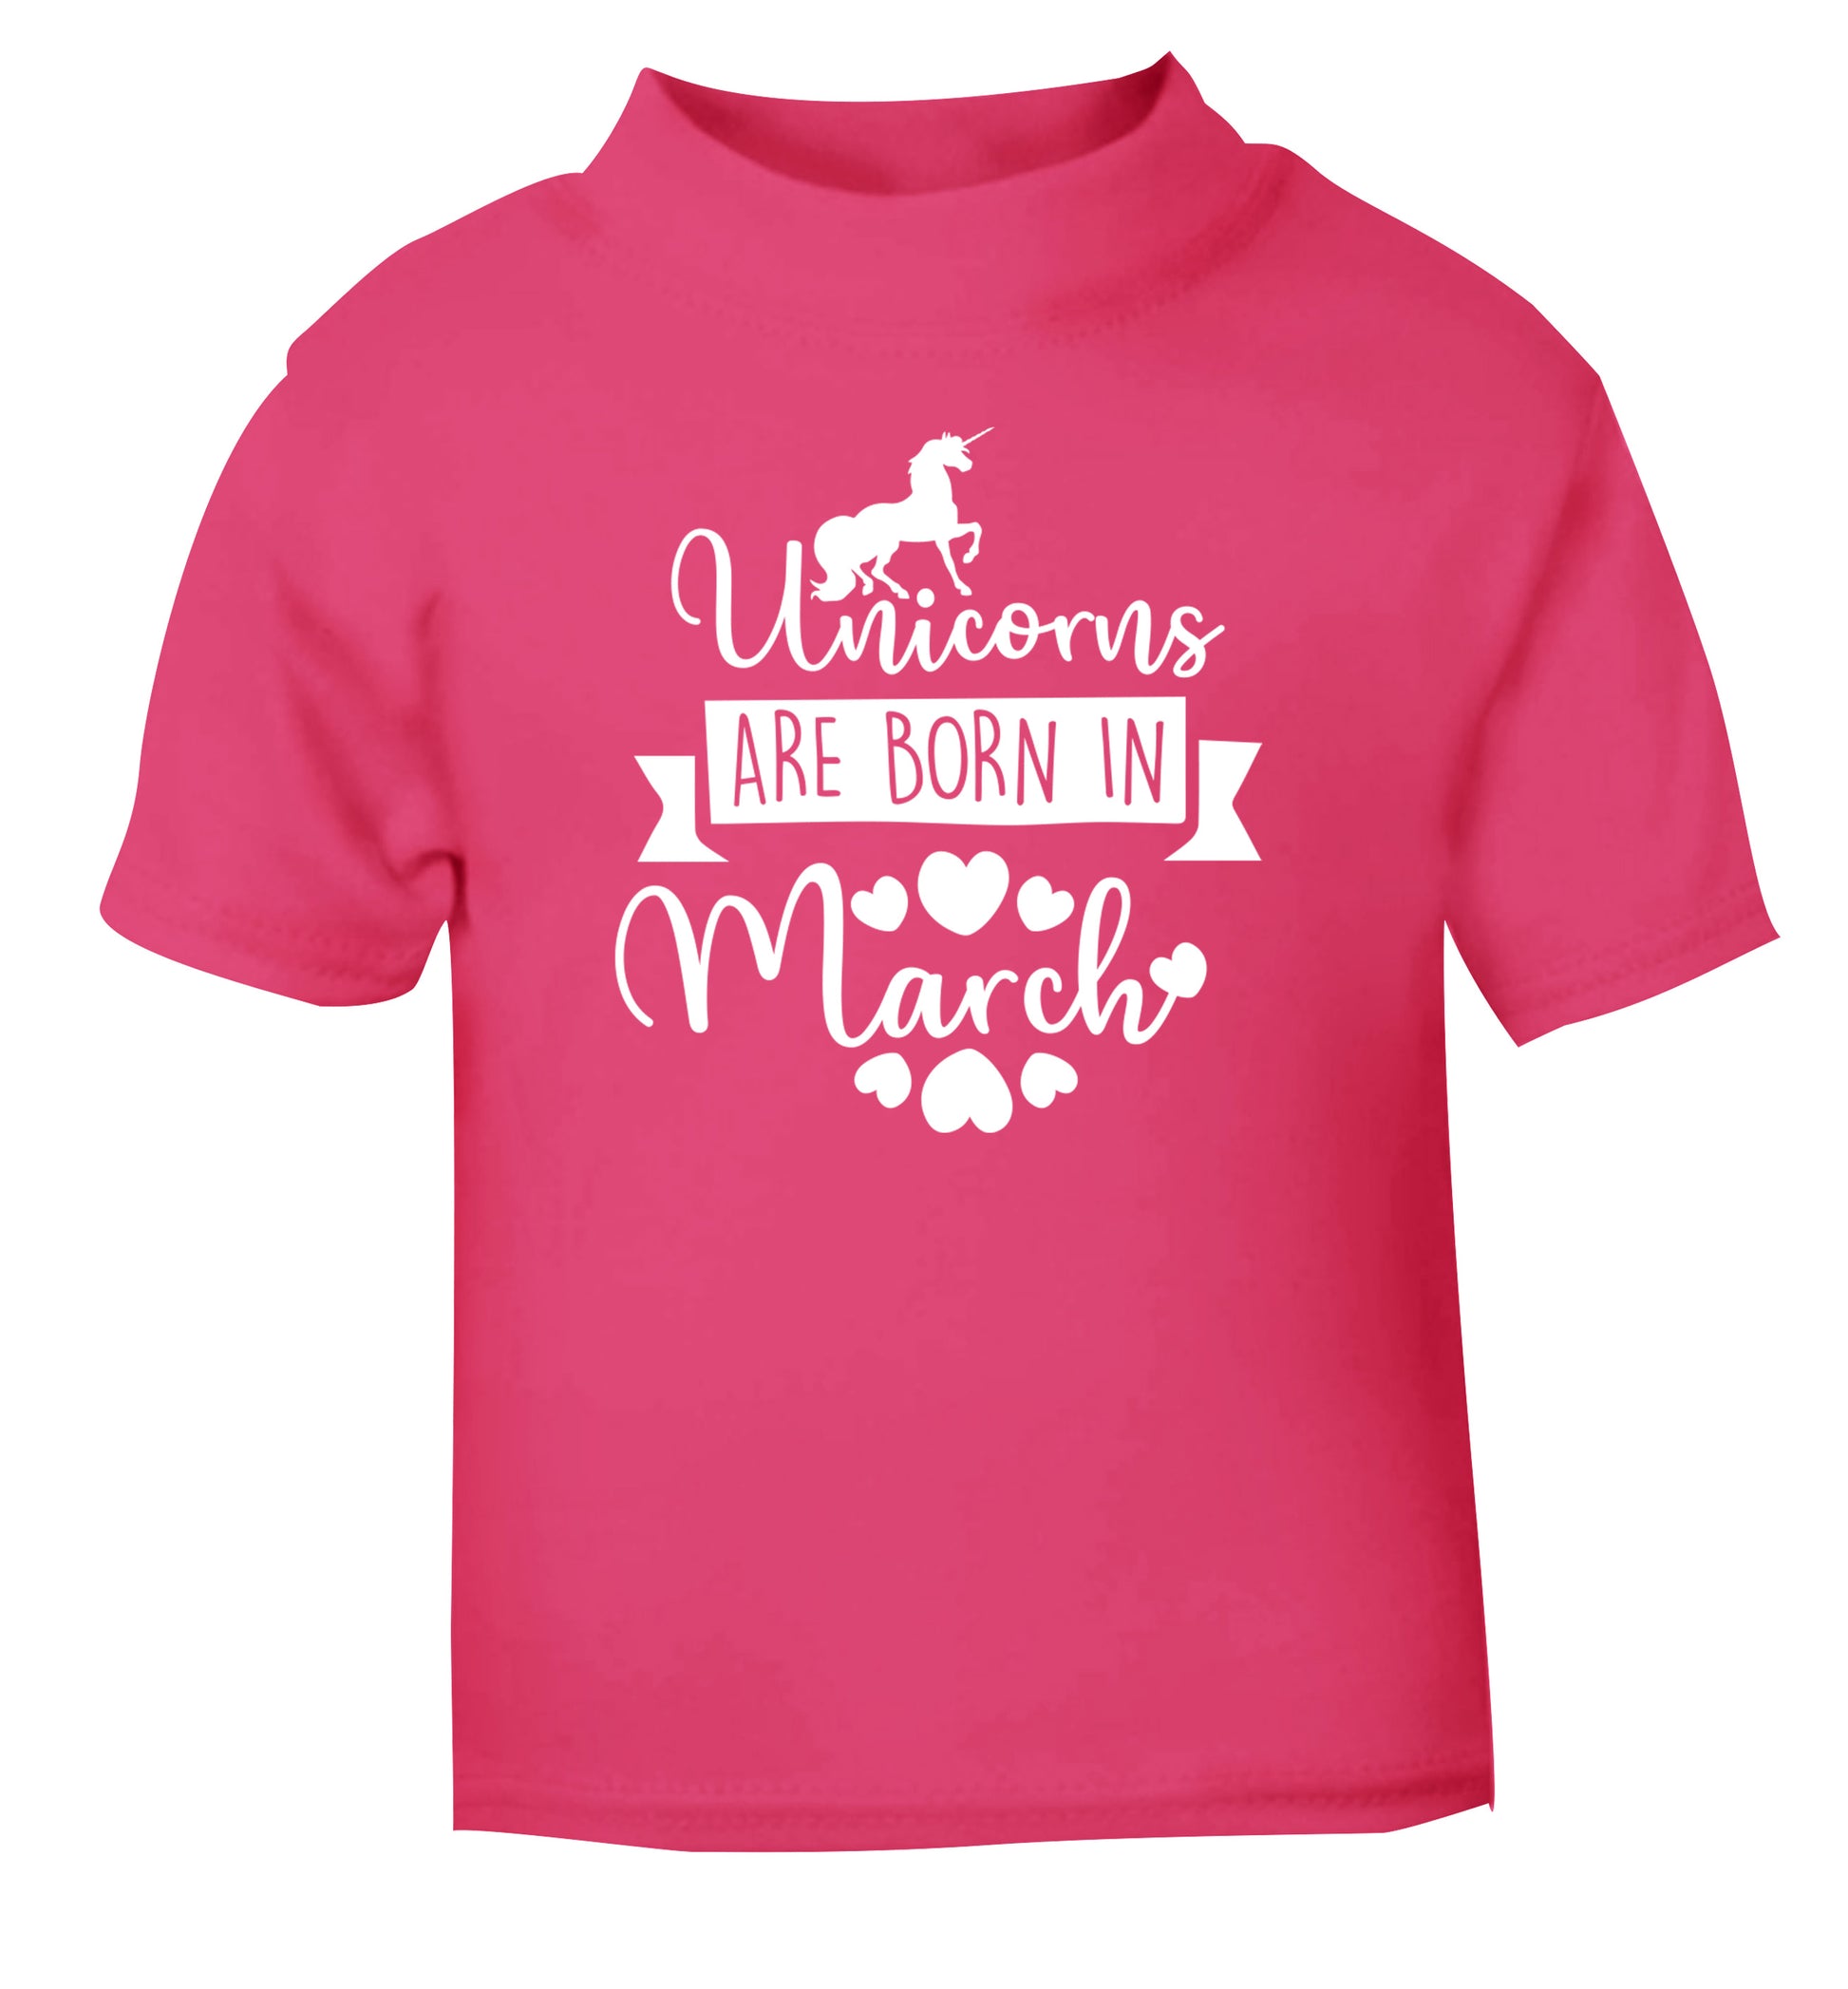 Unicorns are born in March pink Baby Toddler Tshirt 2 Years